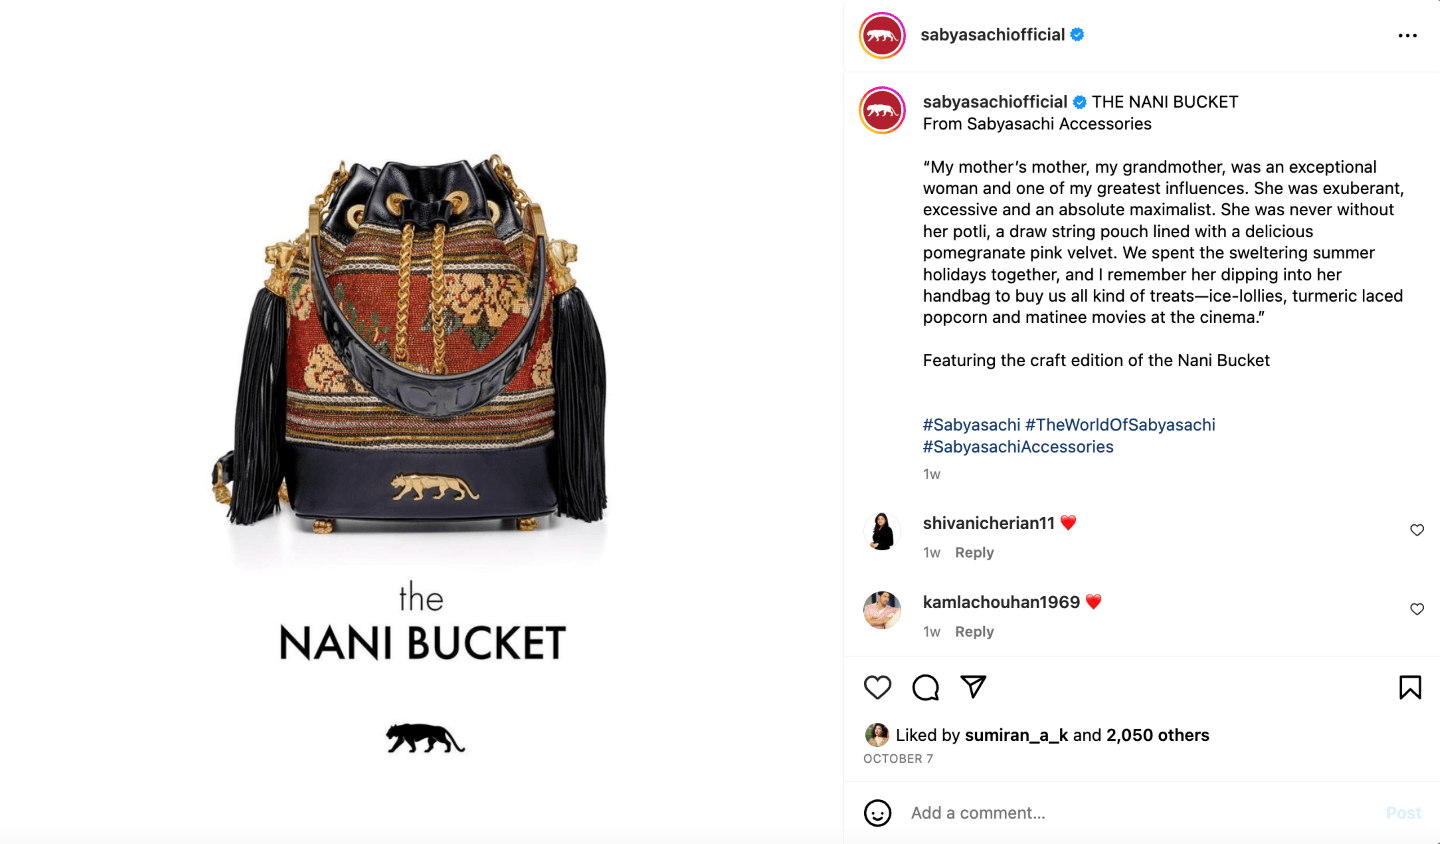 Sabyasachi’s bags of the season take us back in time with the style and embroidery treatment of what would be found in our grandmother’s closet, aptly naming it ‘Nani Bucket’ 